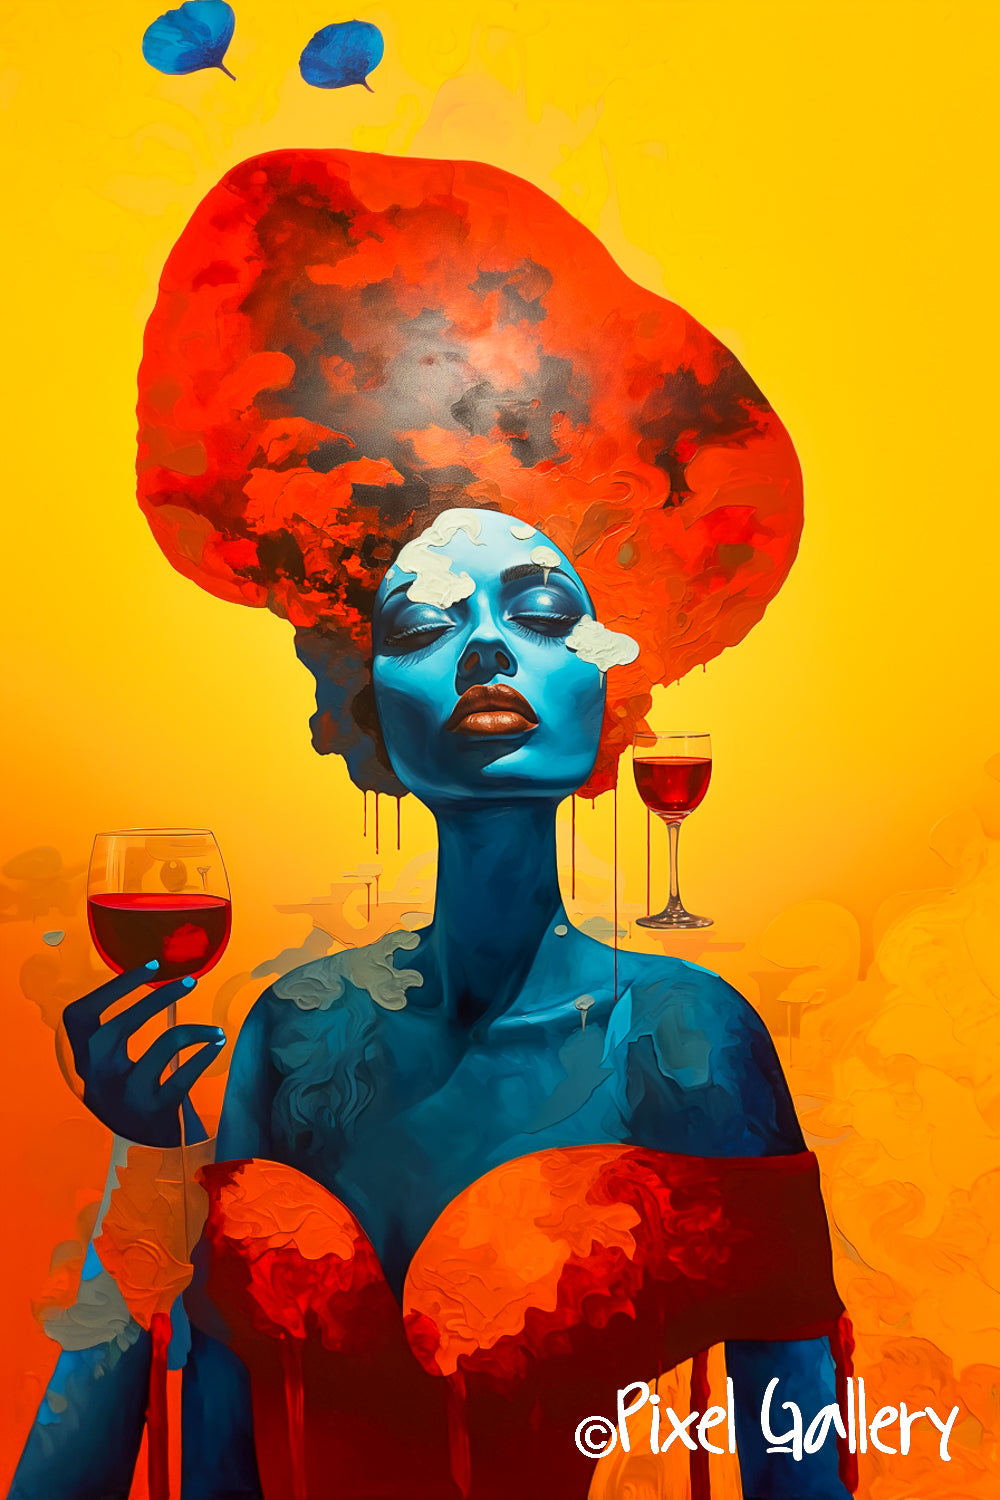 Ai art - A very cool abstract image of a woman holding a wine glass - Pixel Gallery